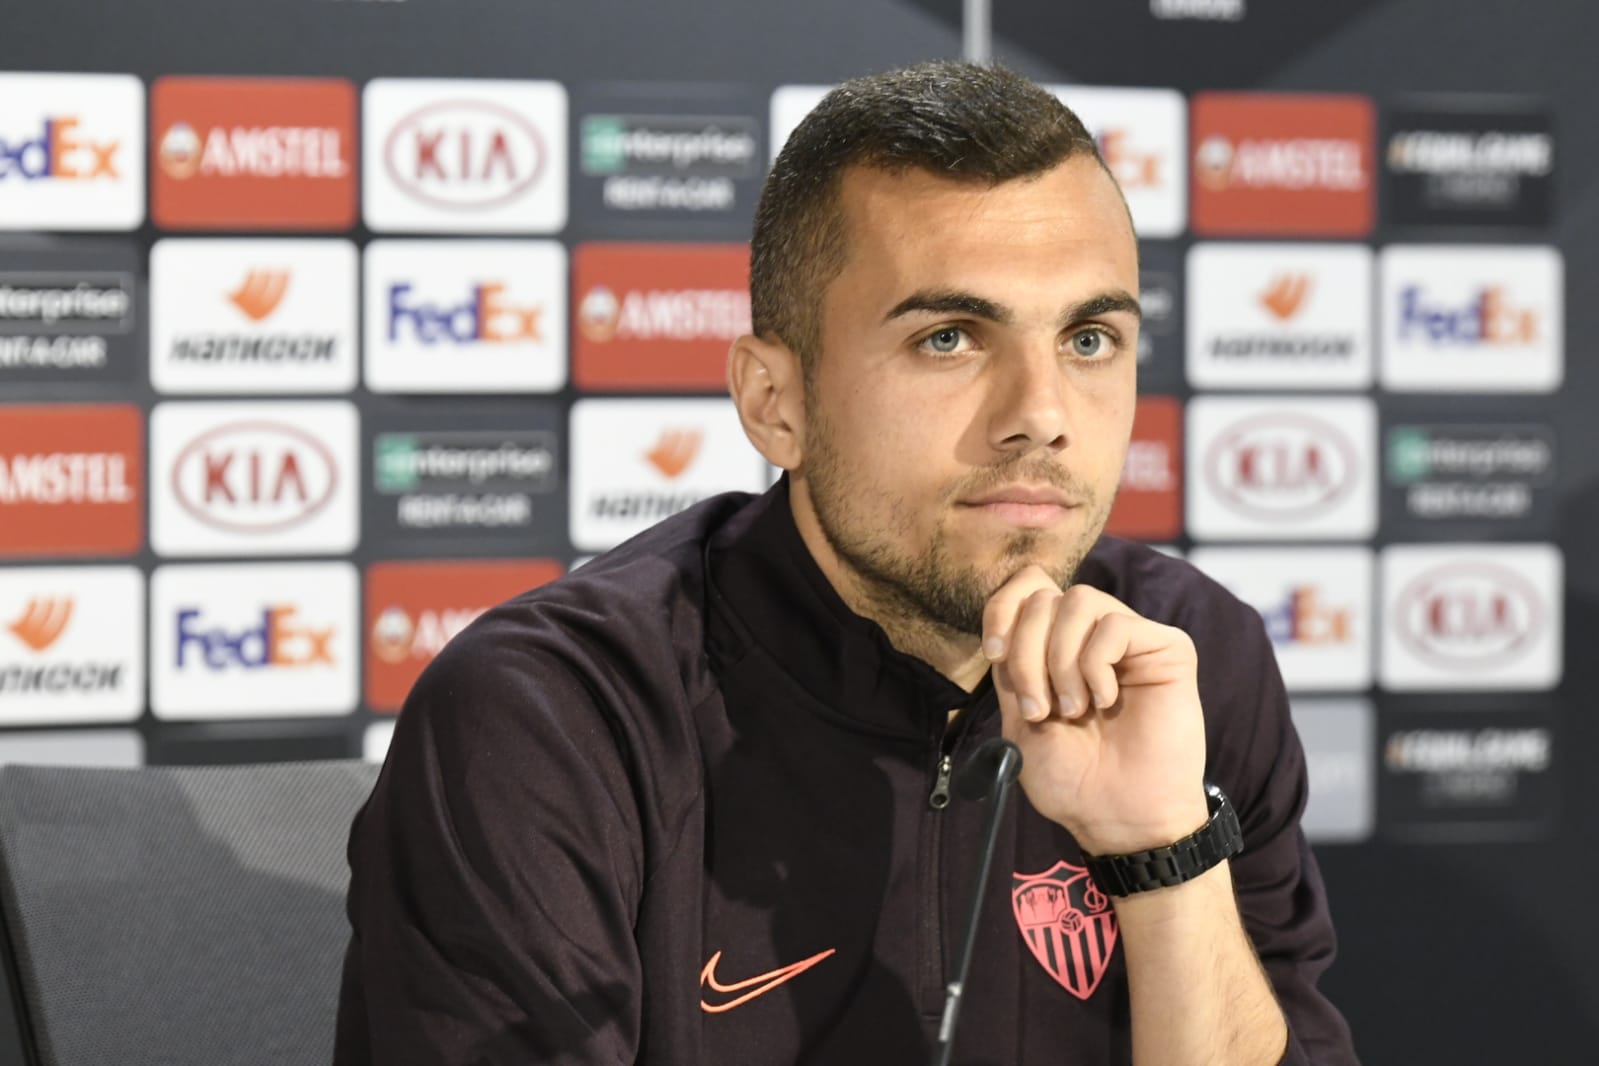 Jordán in the press conference ahead of CFR Cluj encounter